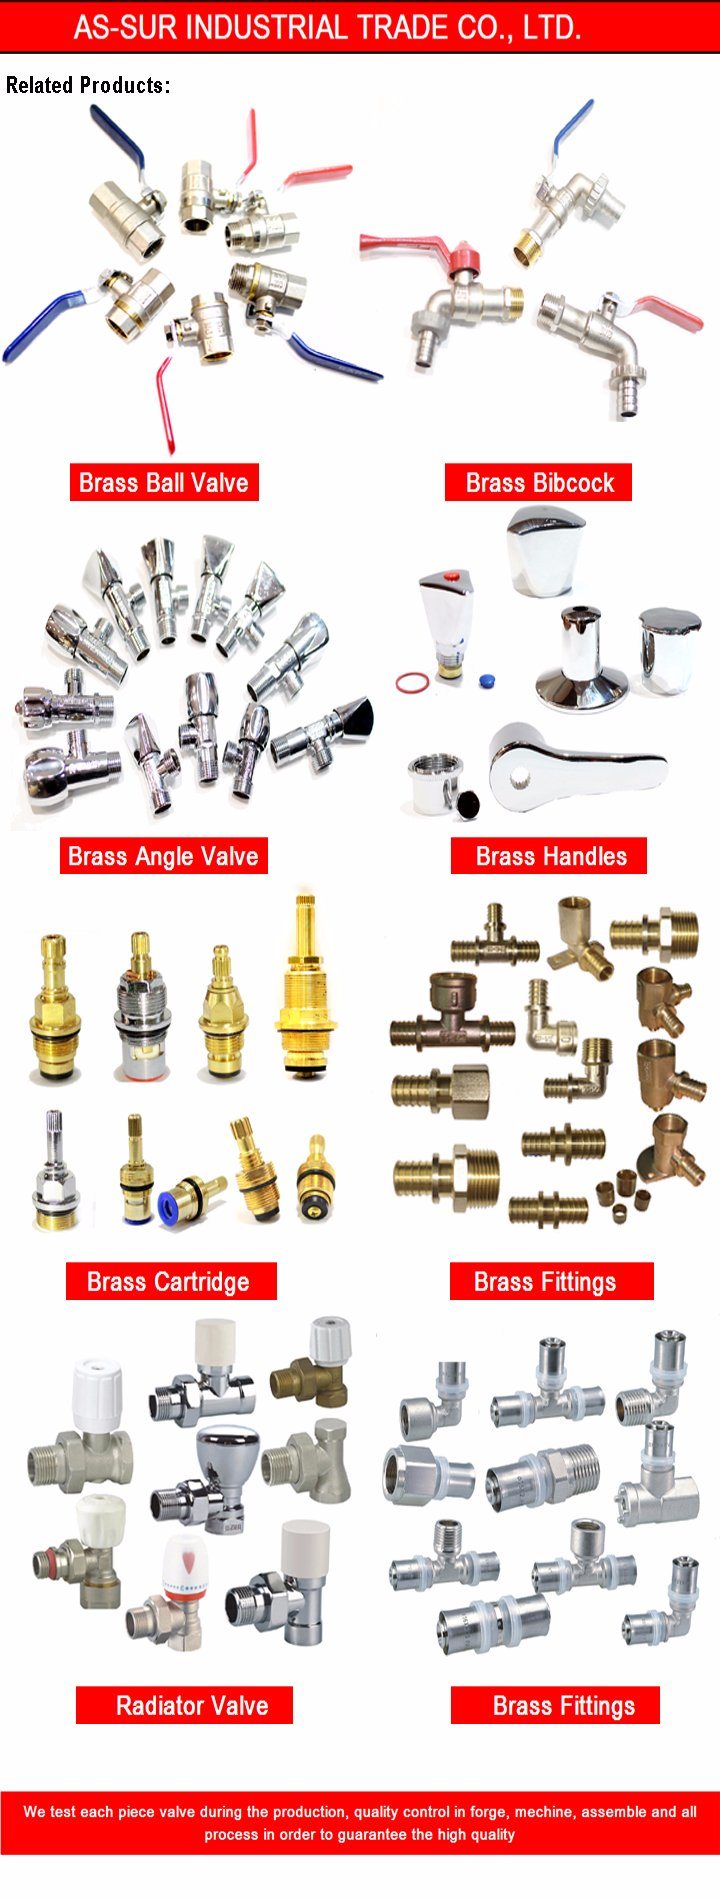 Egypt Model Brass Angle Valve with Zinc Handle as-A1010